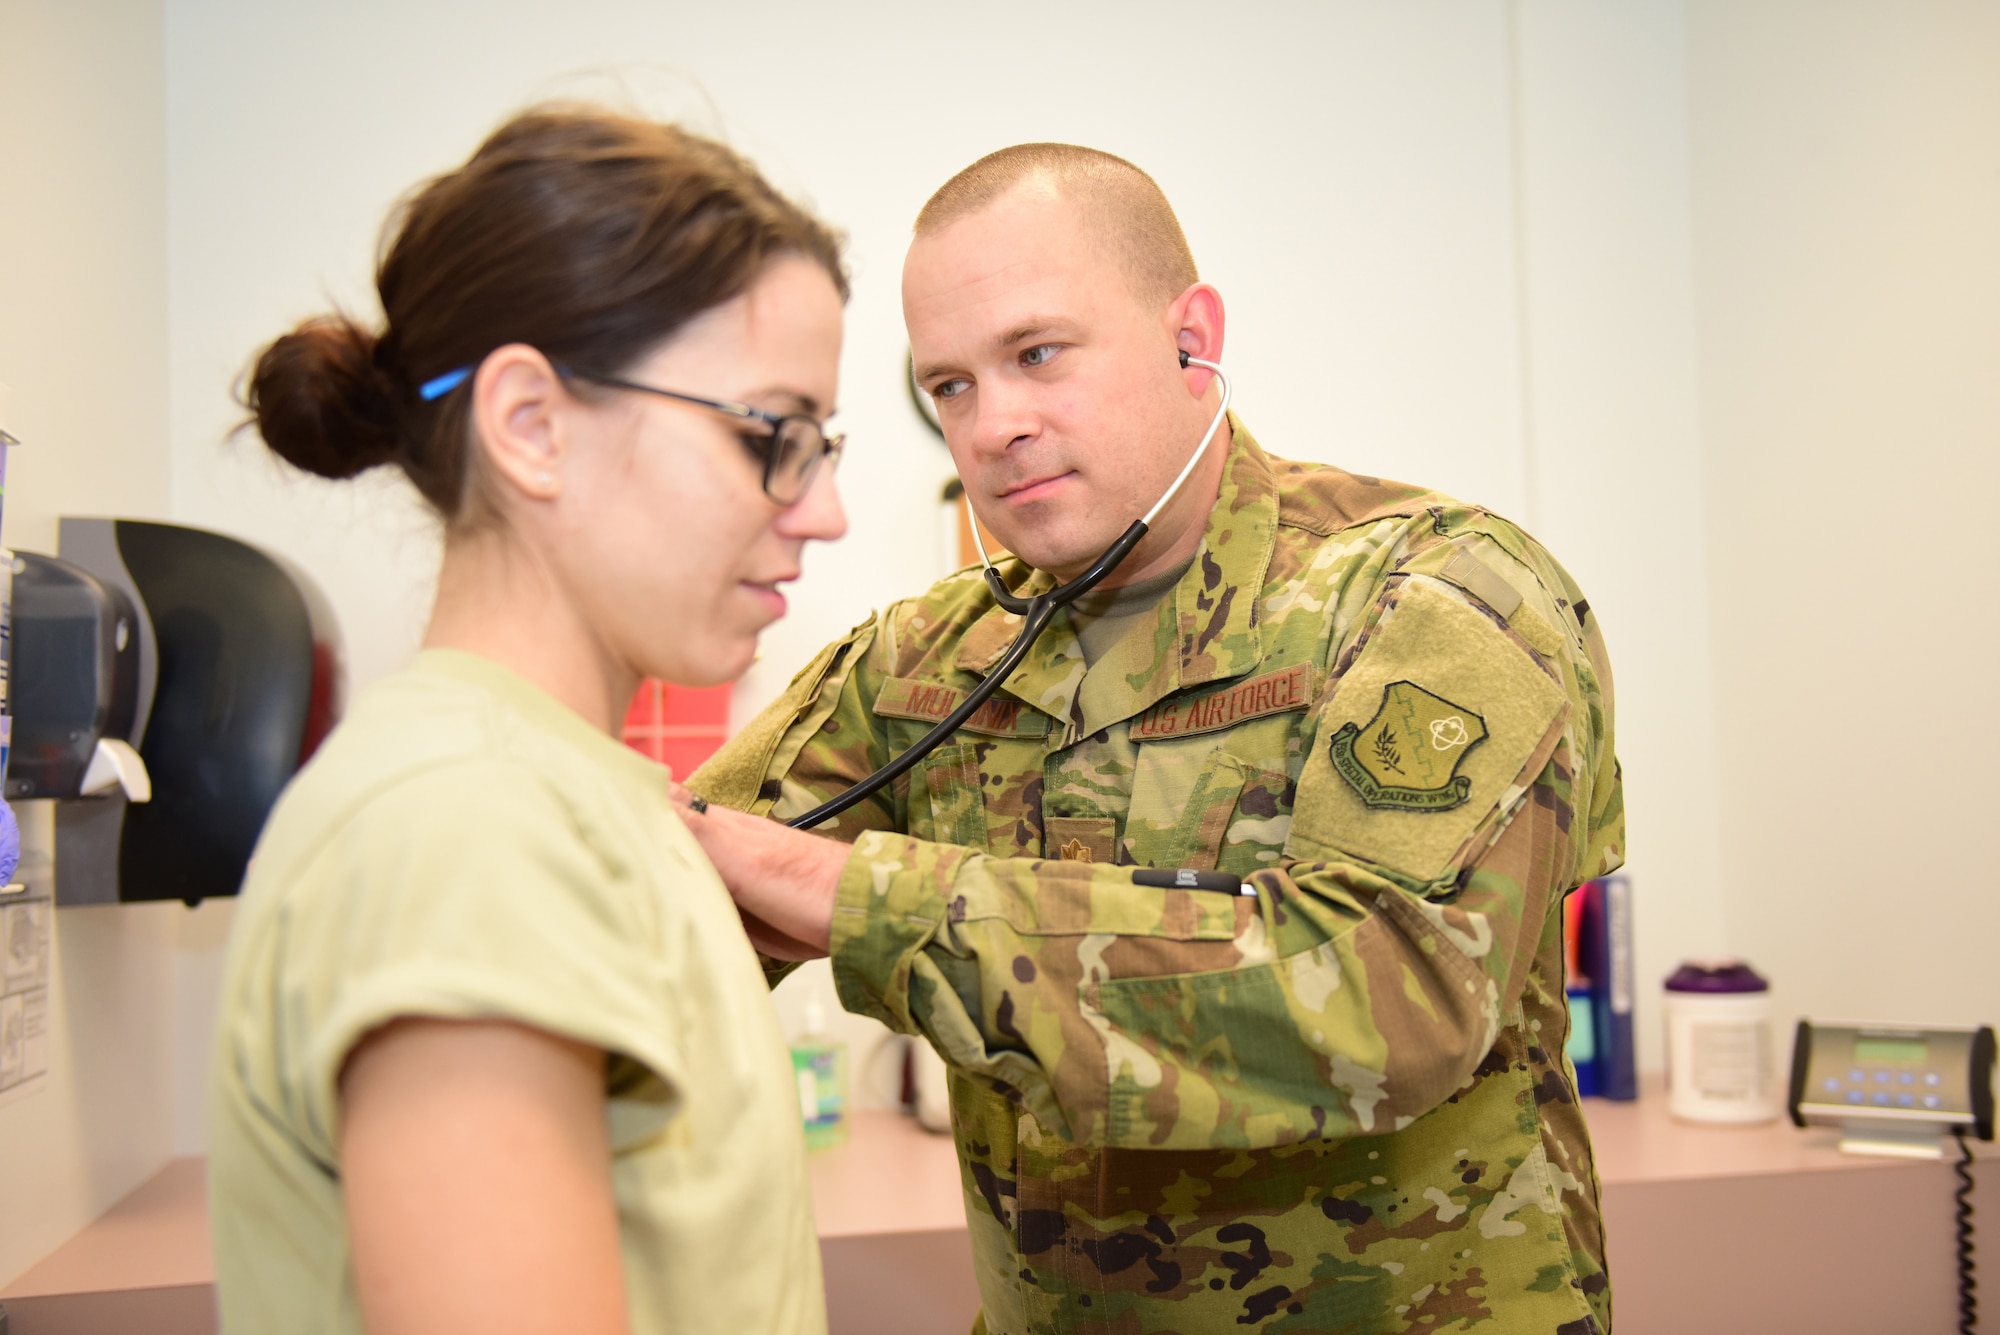 Maj. Matthew Mullinix (right), a physicians’ assistant with the 193rd Special Operations Medical Group, examines a patient as part of a routine check-up during a unit training assembly Nov. 18, 2018, at the 193rd Special Operations Wing, Middletown, Pennsylvania. Recently, while on temporary duty in Lithuania, Mullinix helped to save the life of a civilian by administering cardiopulmonary resuscitation. (U.S. Air National Guard photo by Tech. Sgt. Claire Behney/Released)